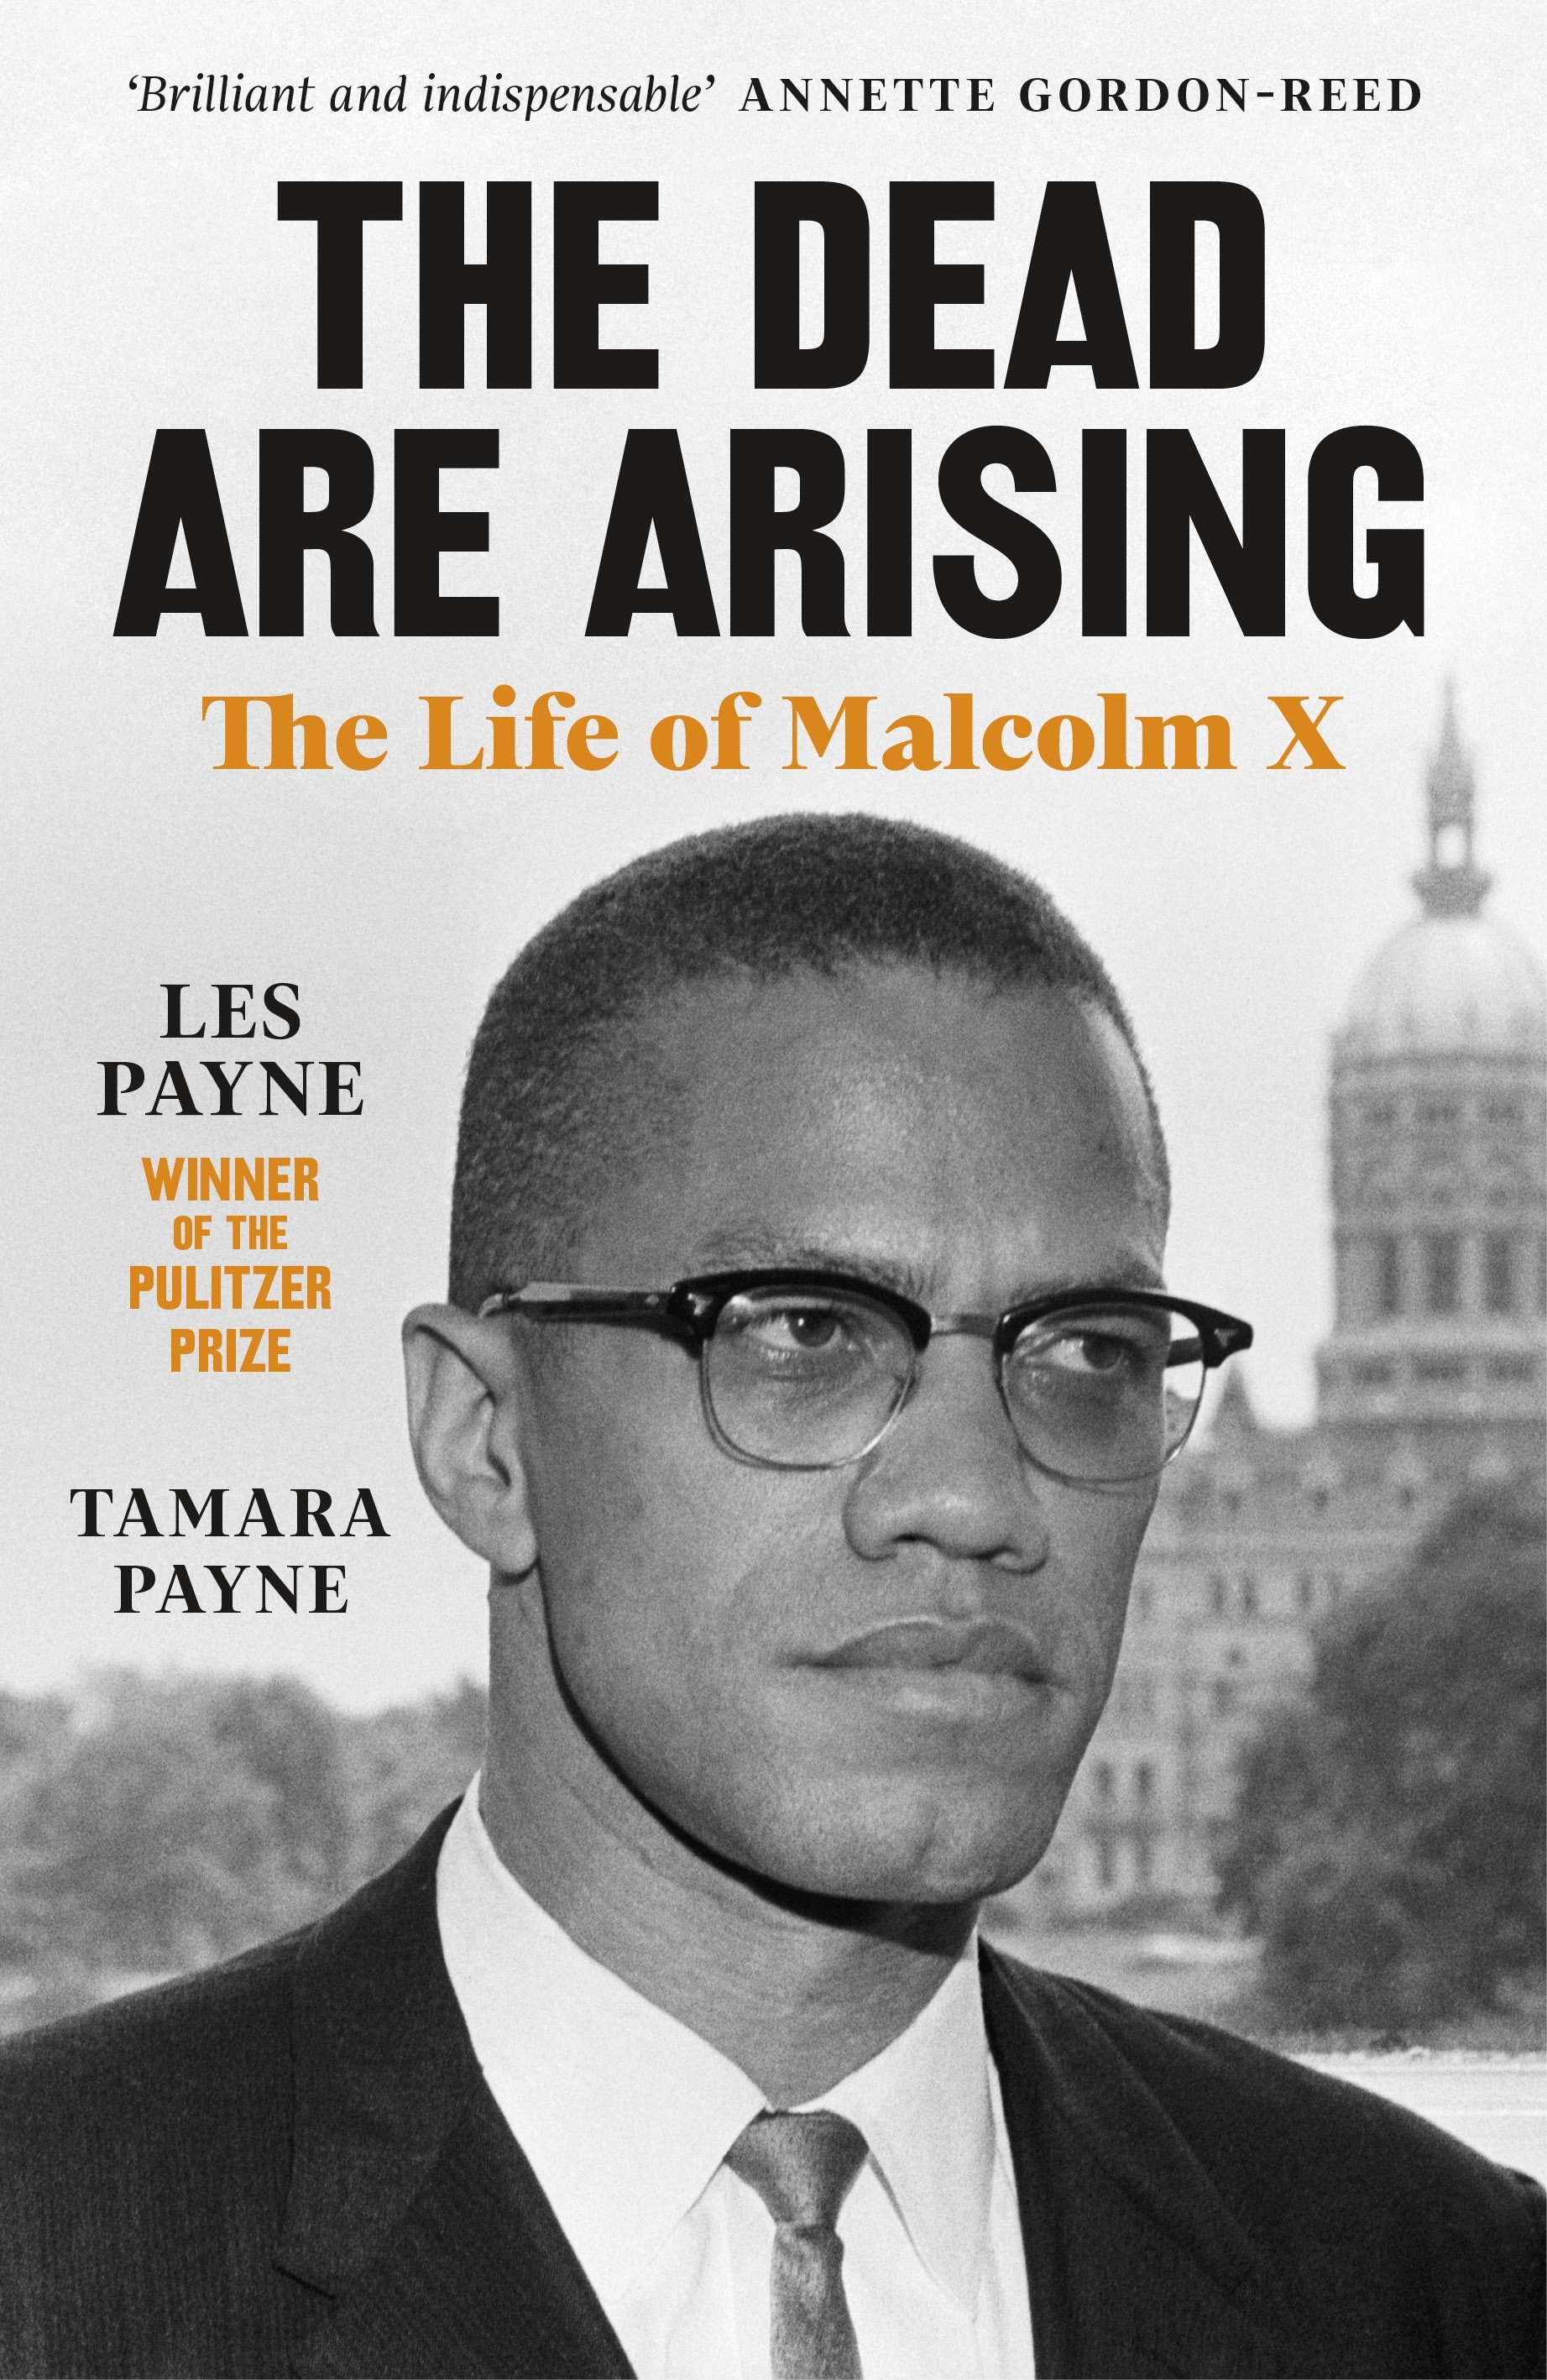 Book “The Dead Are Arising” by Les Payne, Tamara Payne — October 14, 2021